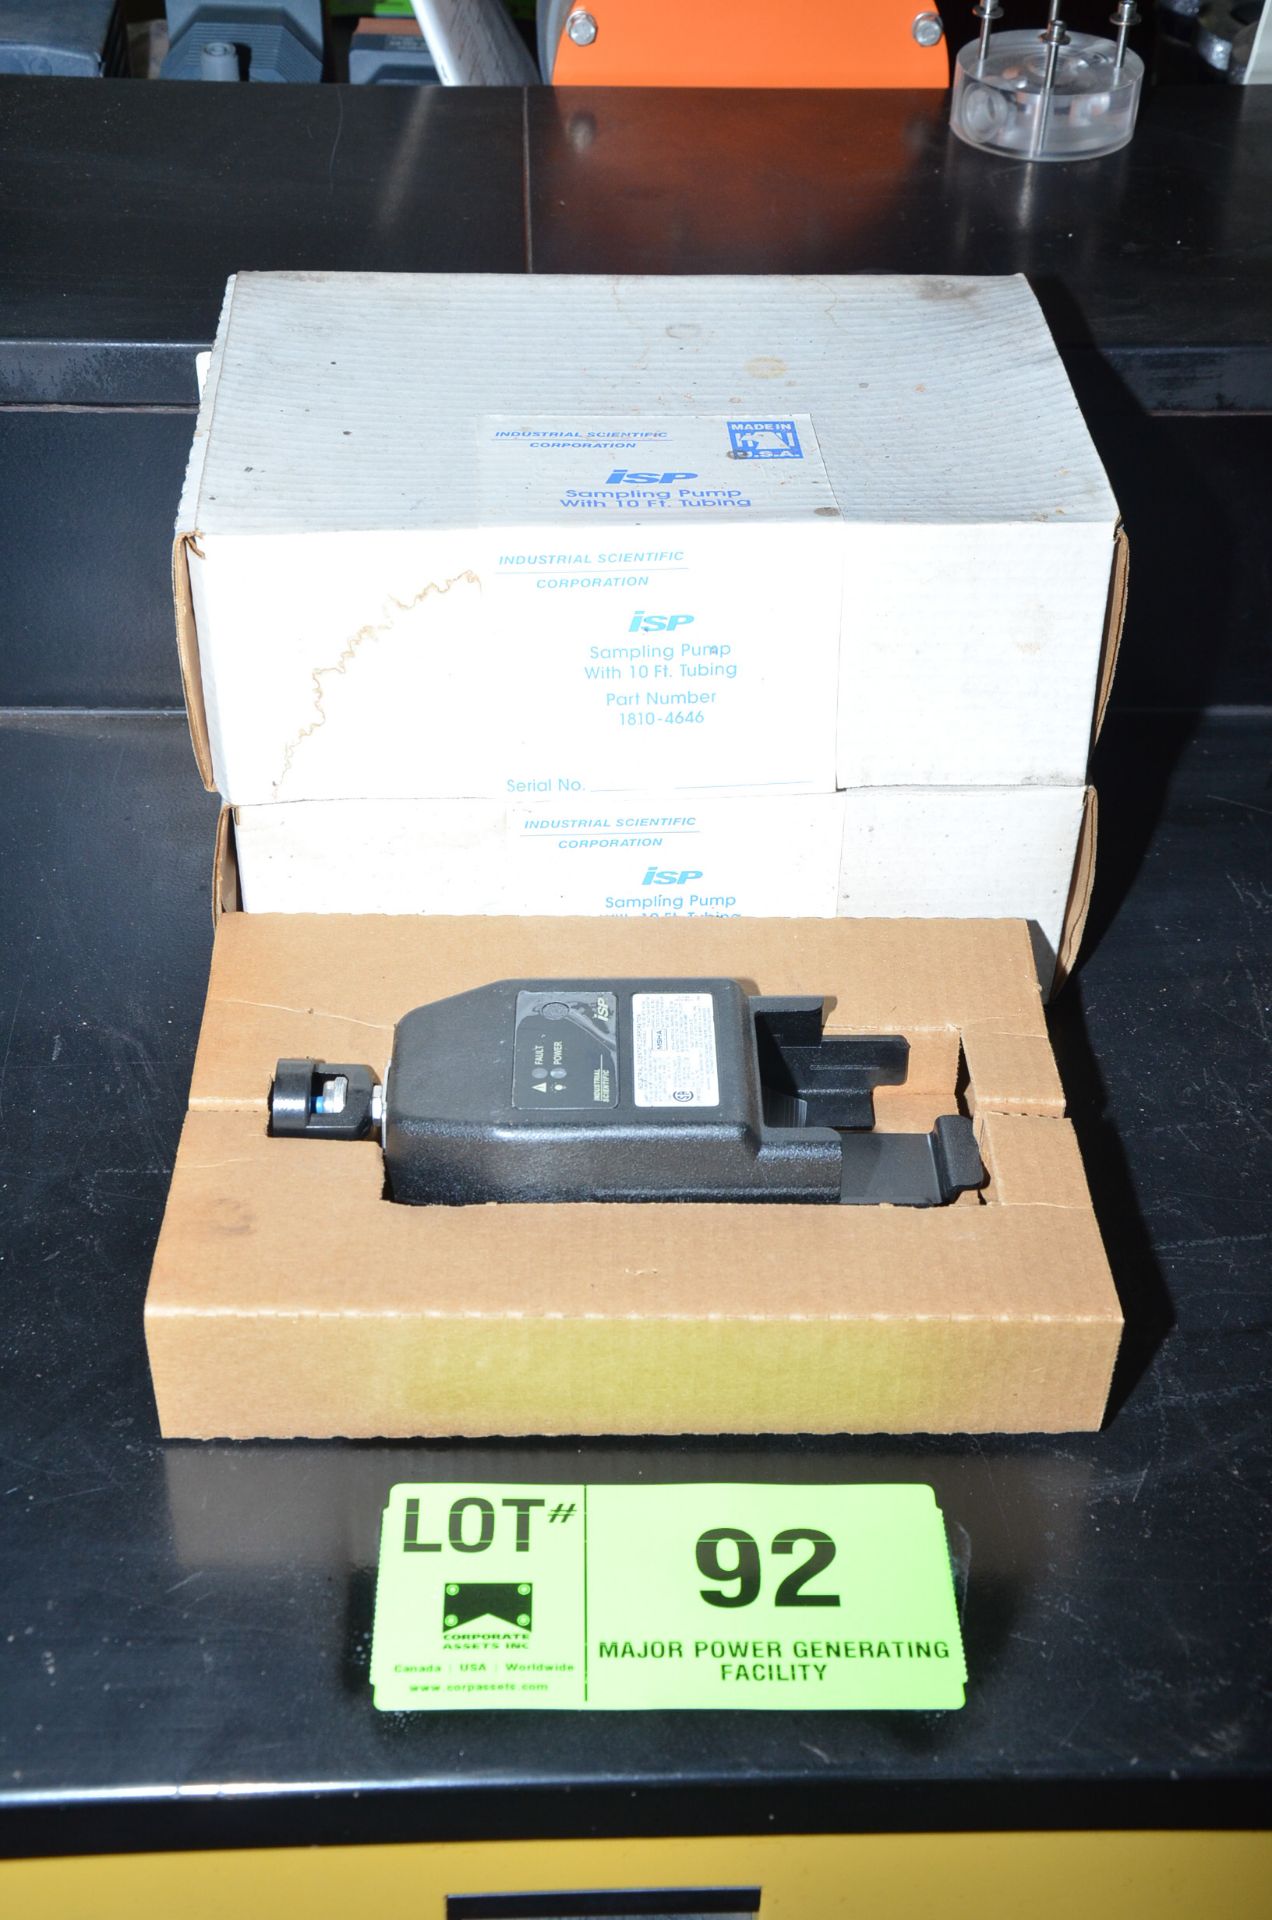 ISP DIGITAL GAS MONITOR CALIBRATOR [RIGGING FEE FOR LOT #92 - $25 USD PLUS APPLICABLE TAXES]